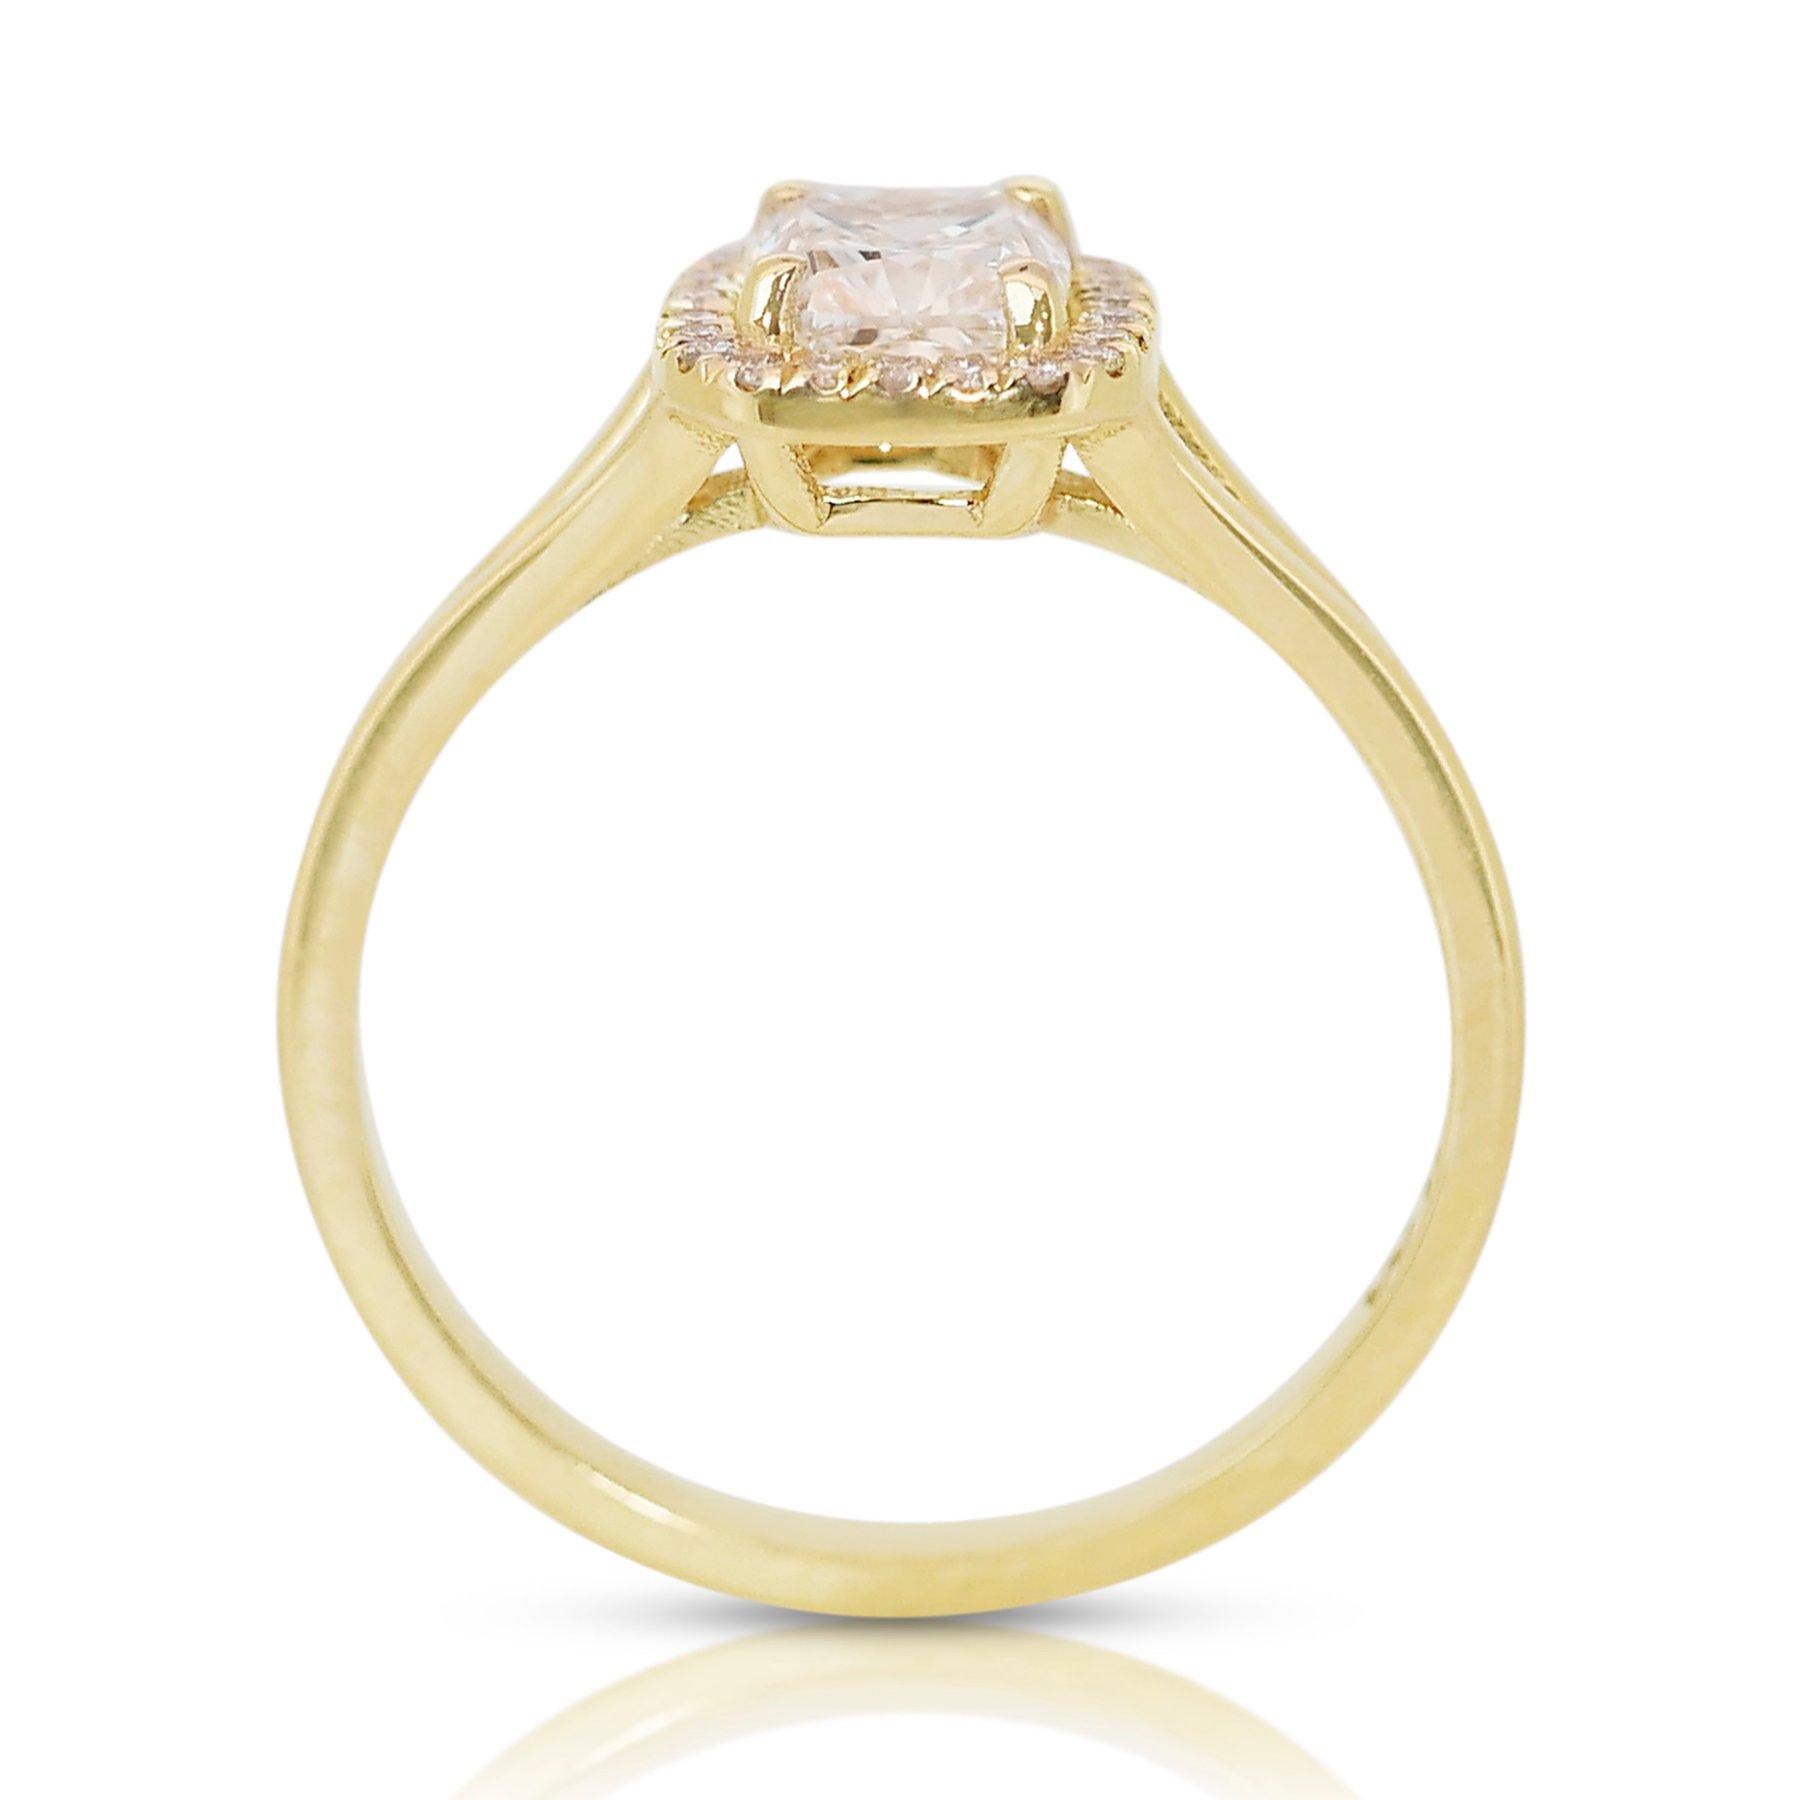 Sparkling 1.63ct Diamond Halo Ring in 18k Yellow Gold - GIA Certified In New Condition For Sale In רמת גן, IL